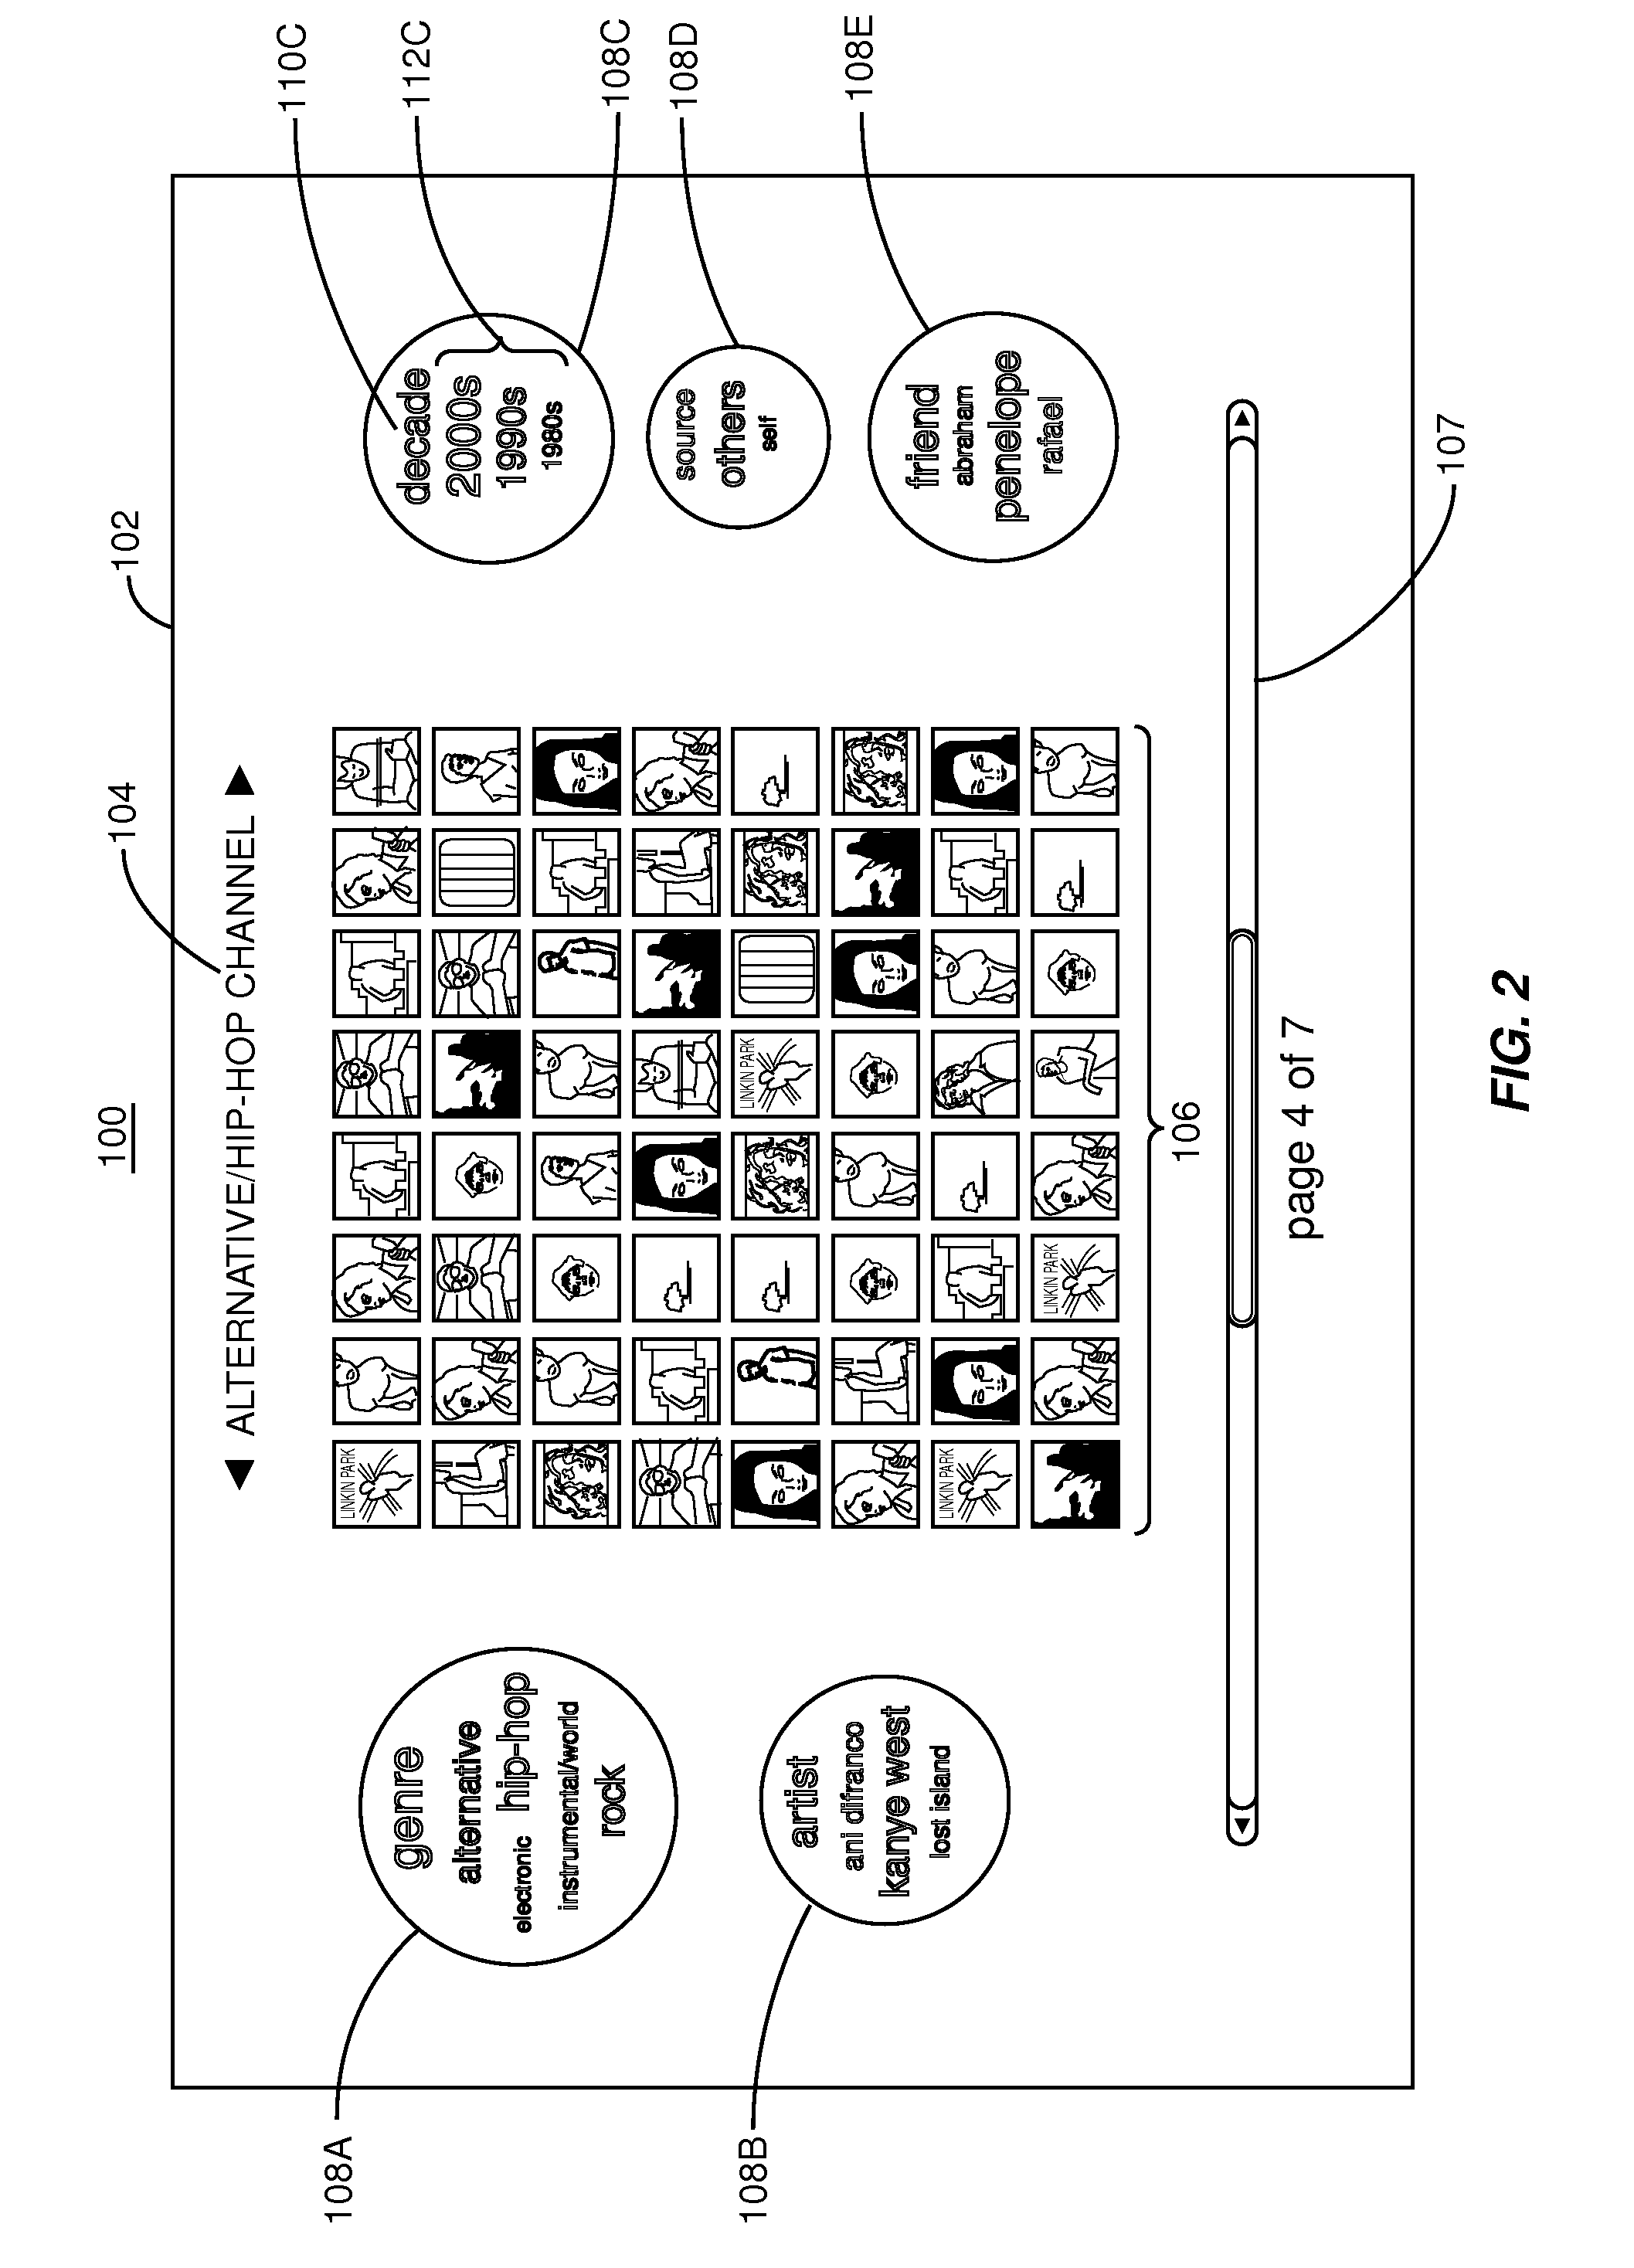 System and method for generating dynamically filtered content results, including for audio and/or video channels